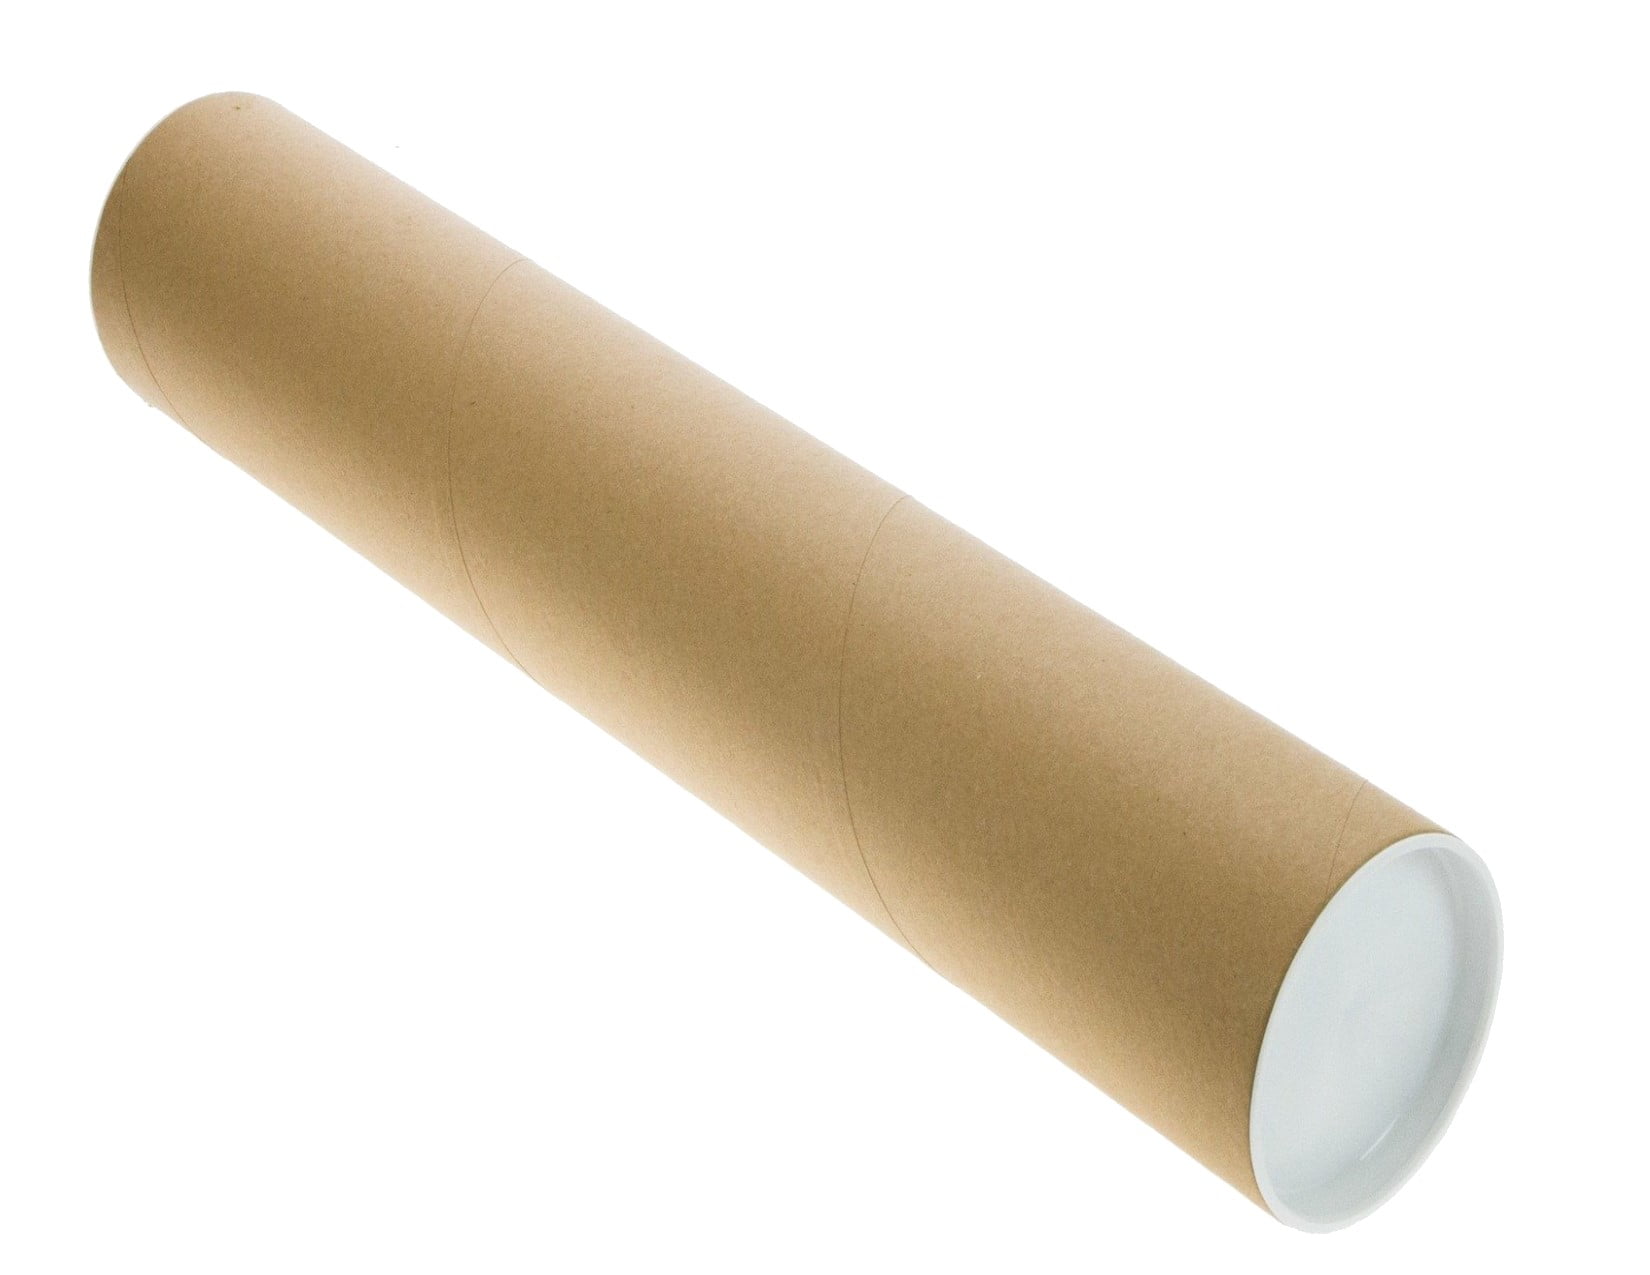 20-2 X 12 Cardboard Mailing Shipping Tubes w/ End Caps 